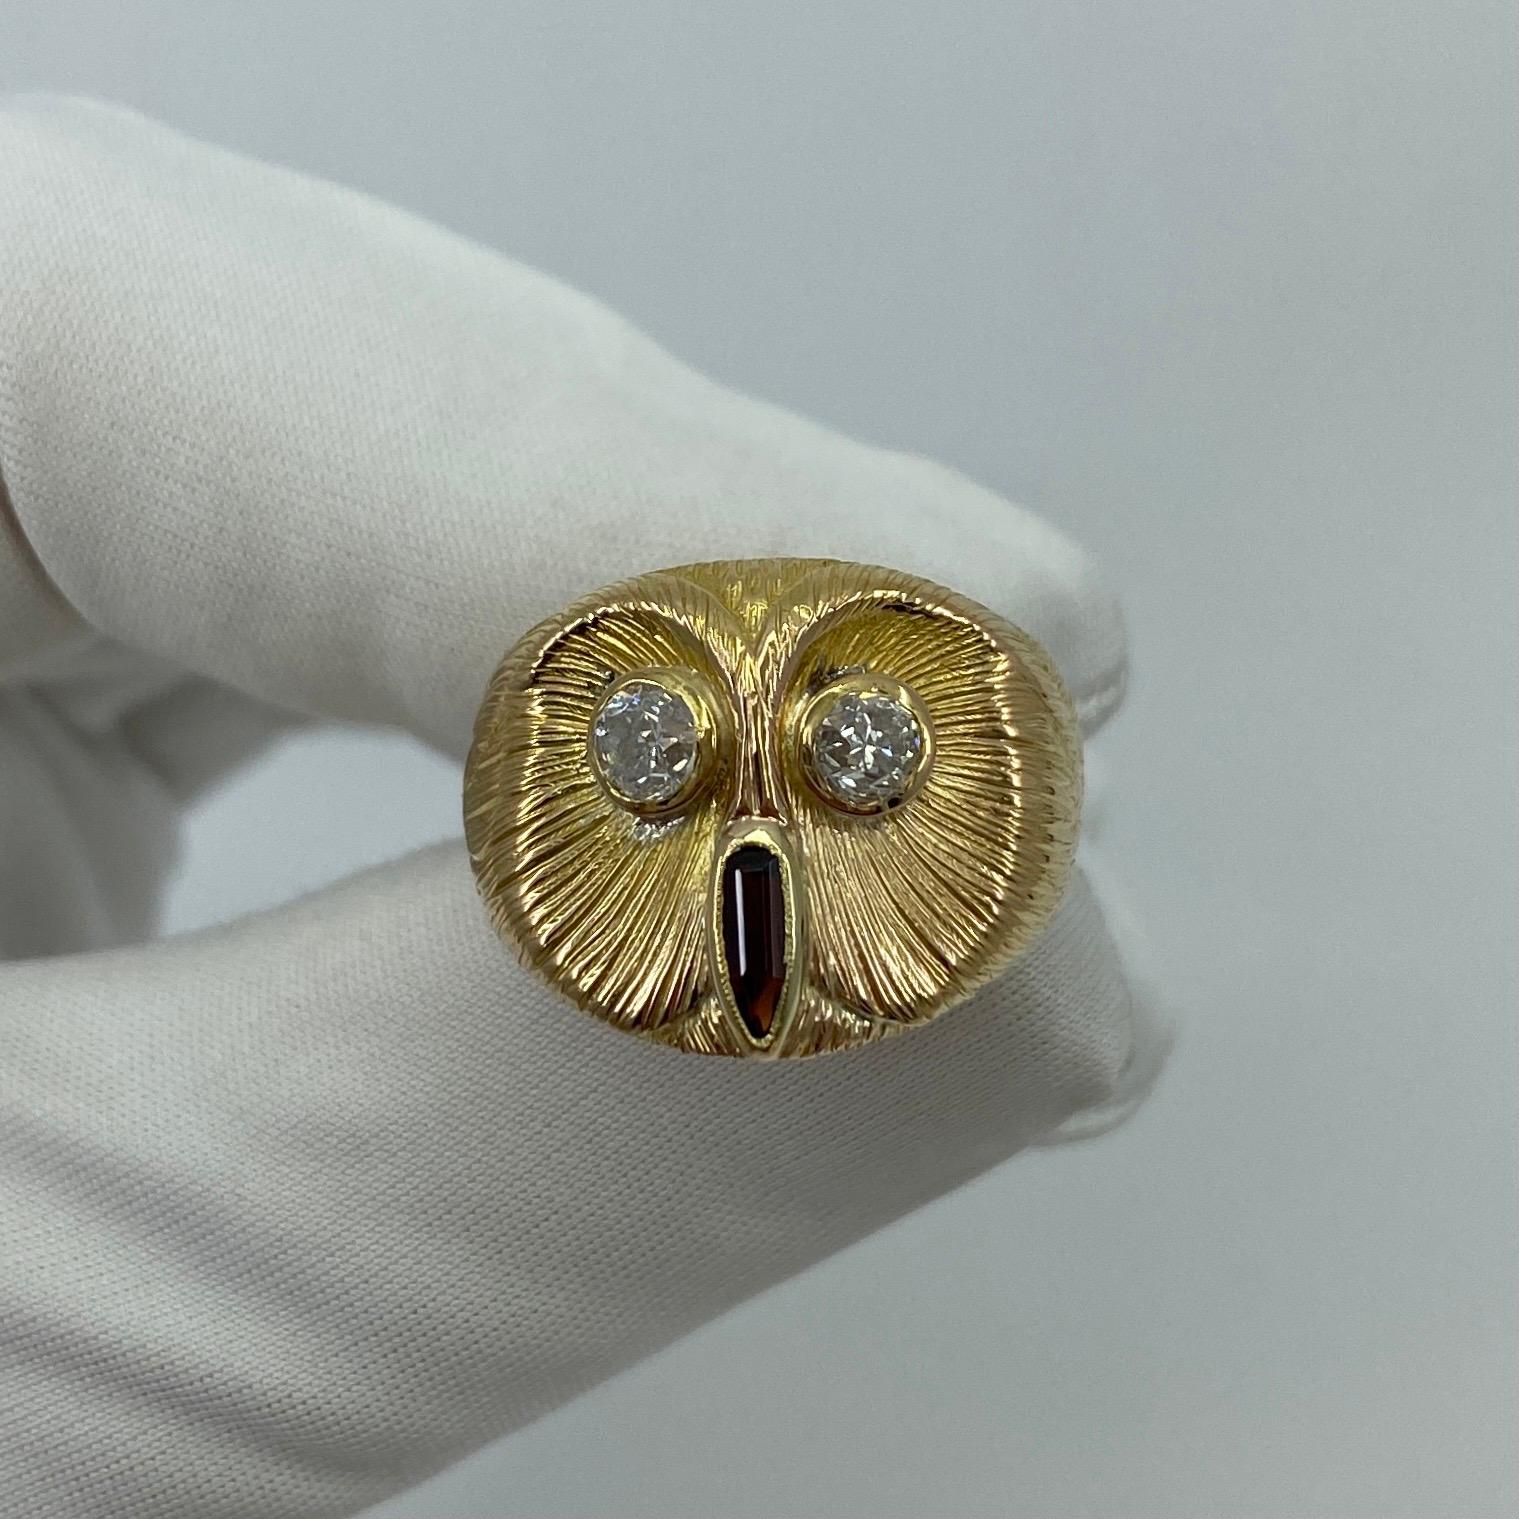 Handmade Italian Diamond & Garnet 18K Yellow Gold Vintage Owl Ring.

Stunning and unique designed handmade owl ring with 2 old cut diamonds for eyes (approx 0.70ct G/H Colour and SI1-2 clarity) and a deep red rhodolite garnet for the nose (approx